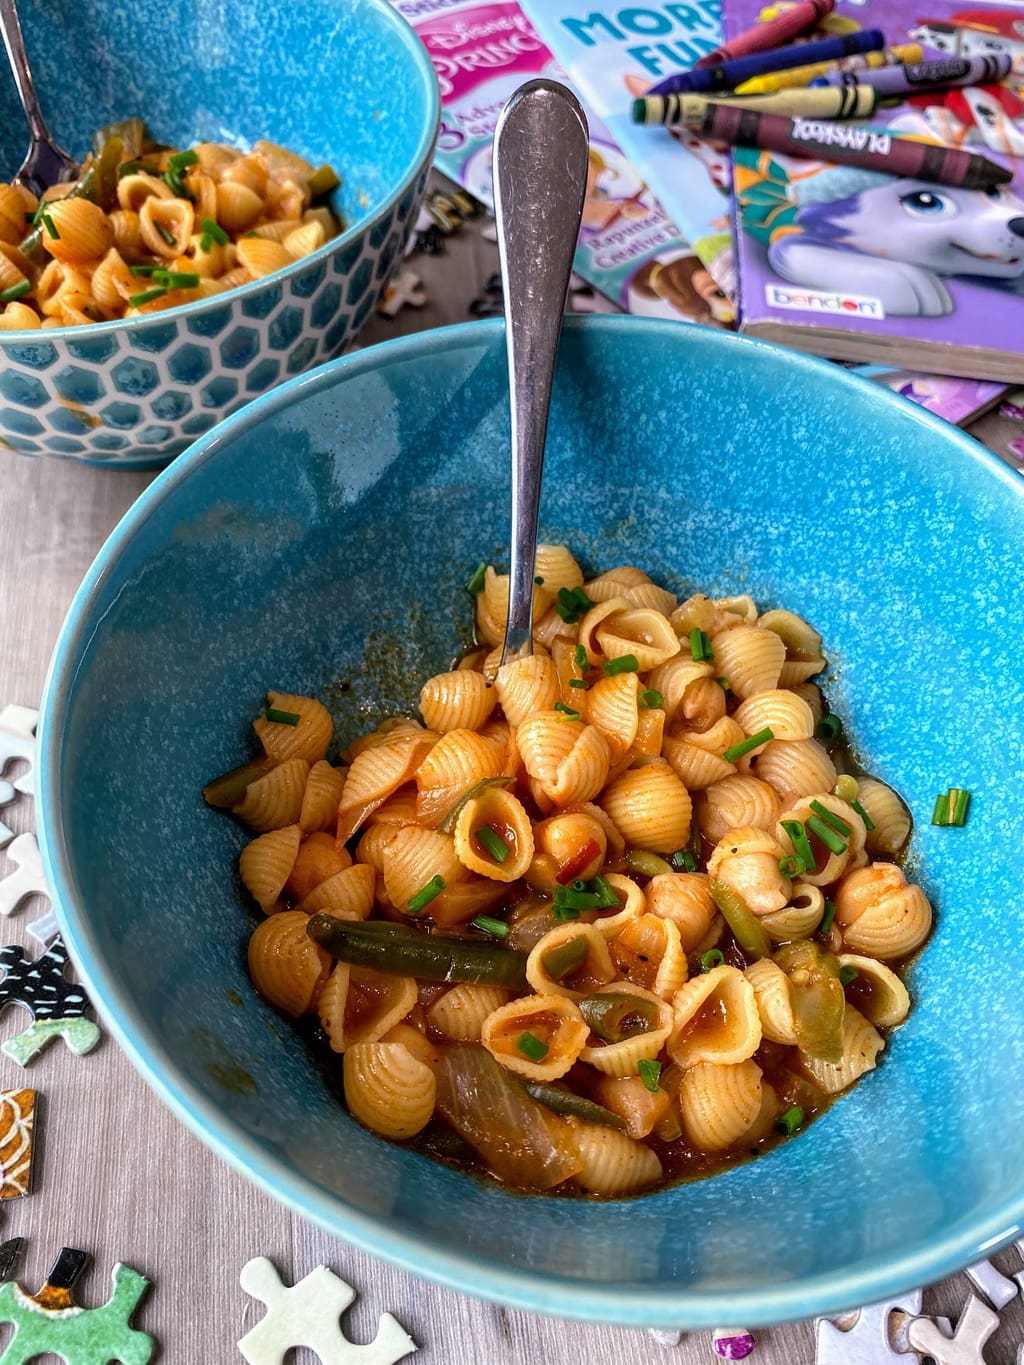 pasta with chickpeas and chives in blue bowl on table with puzzle pieces, crayons and coloring books